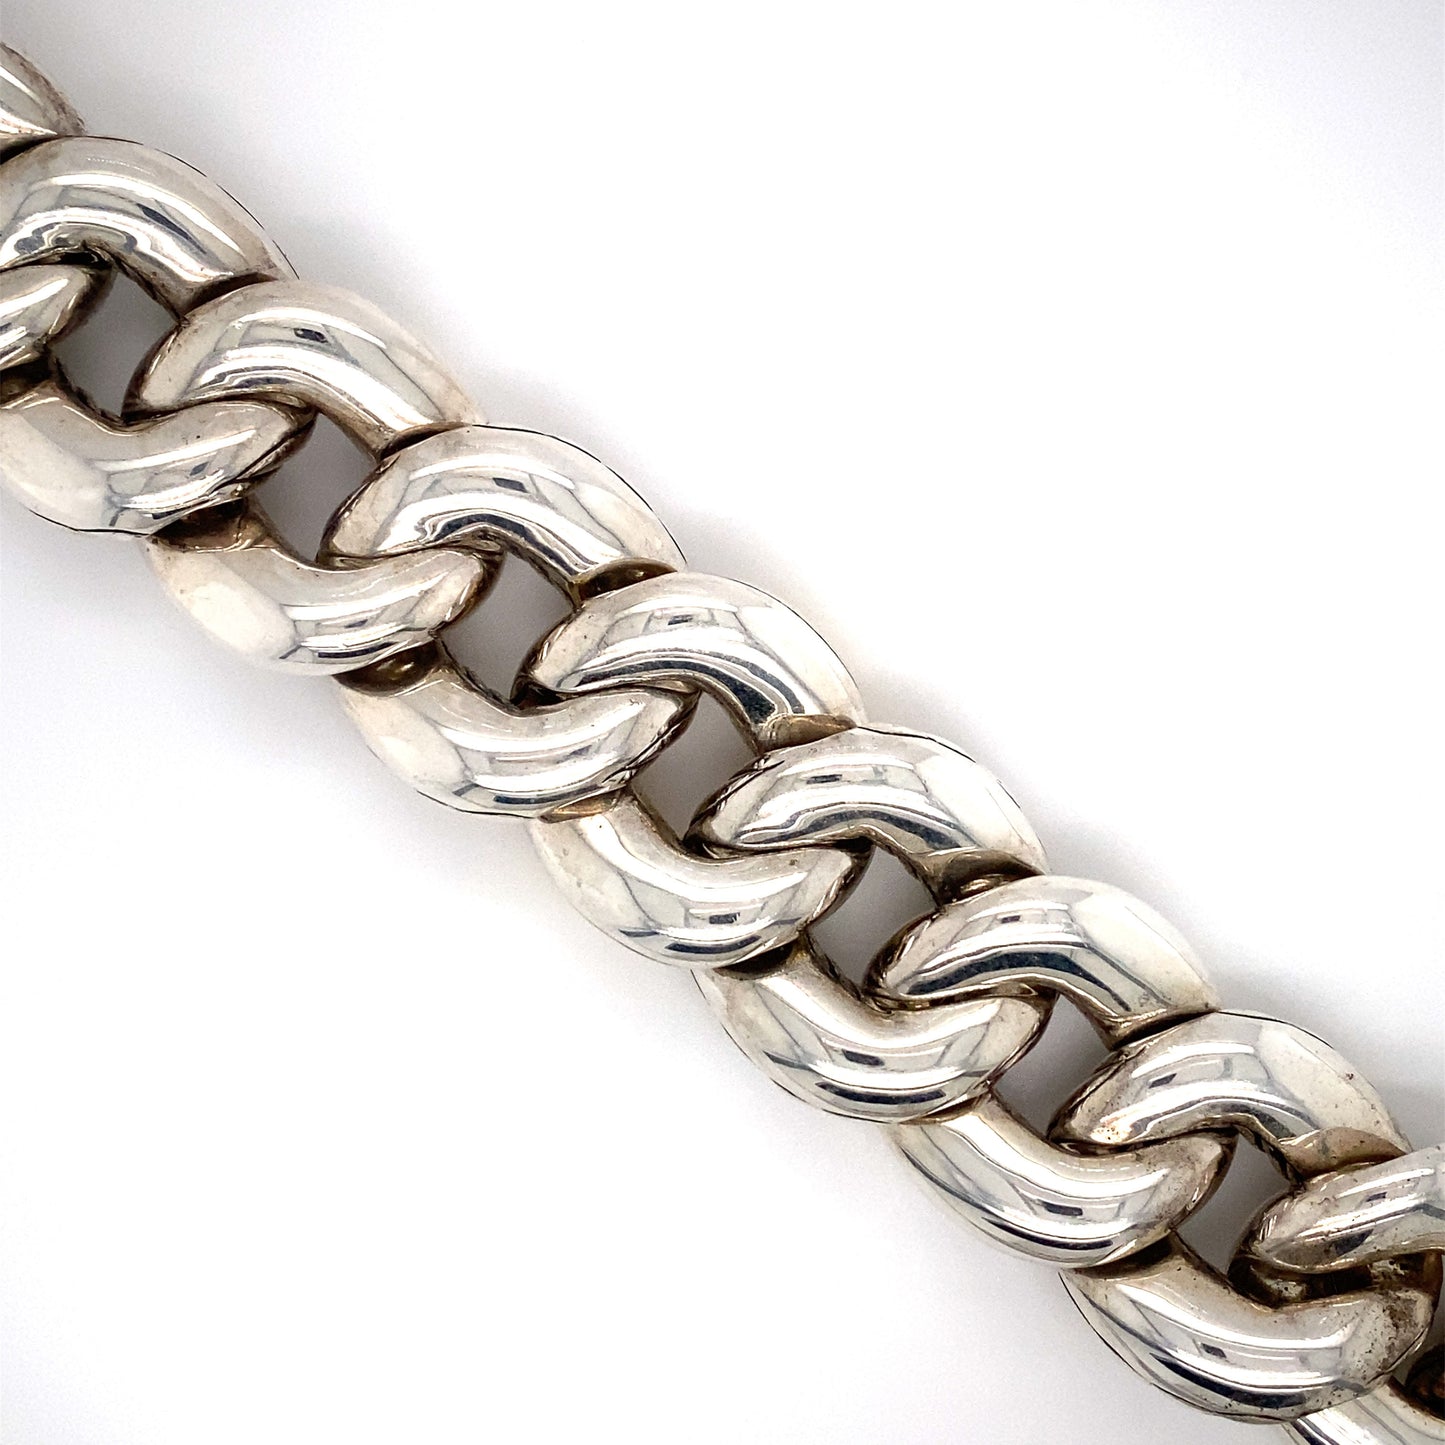 David Yurman Large Curb Link Chain Bracelet in Sterling Silver and 18K Gold